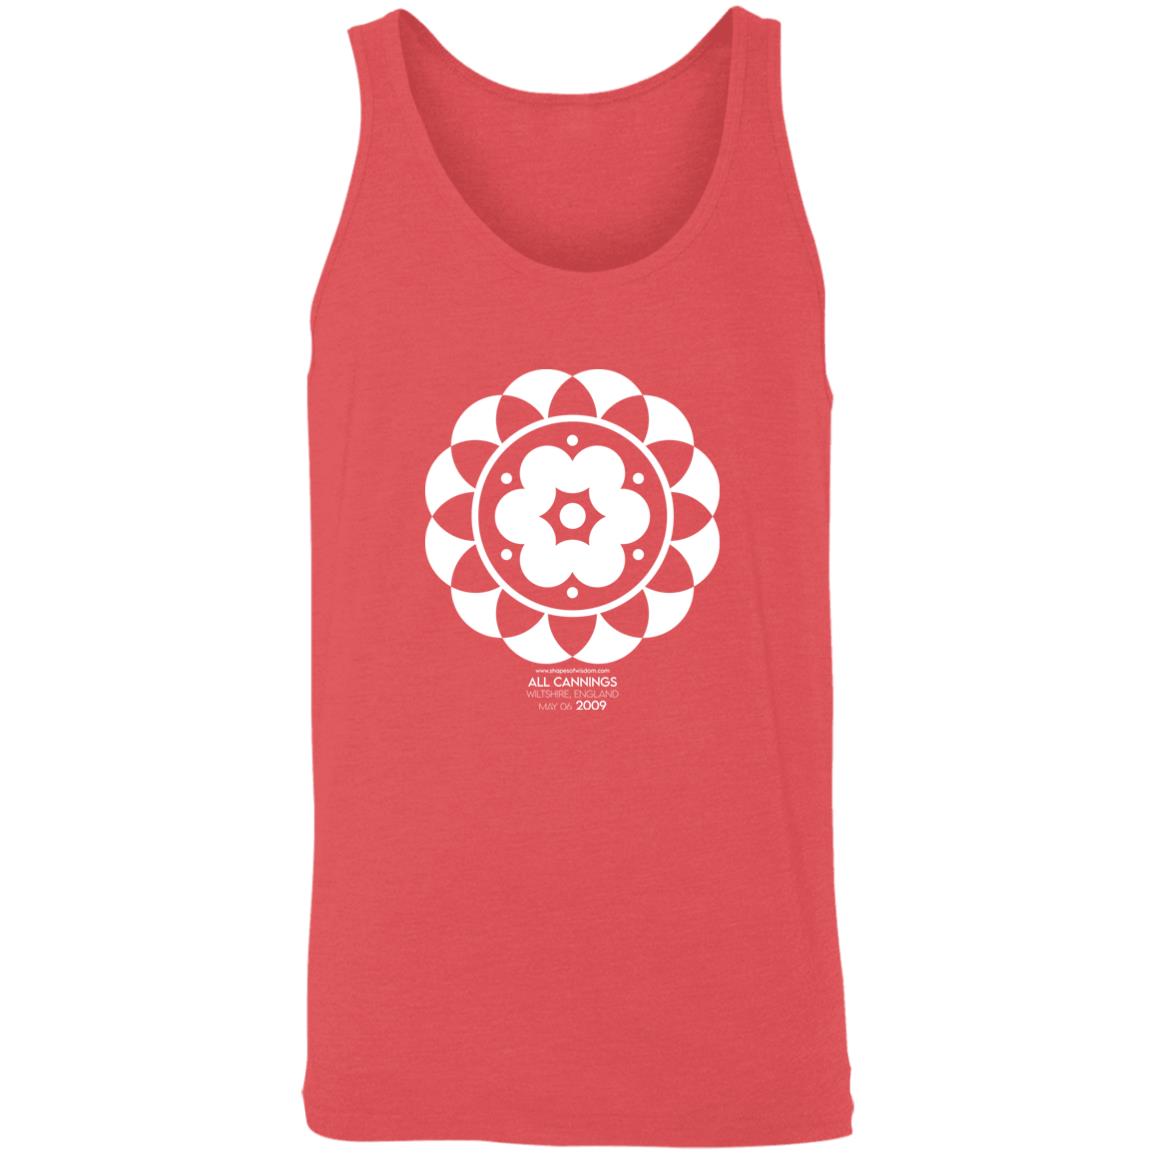 Crop Circle Tank Top - All Cannings 3